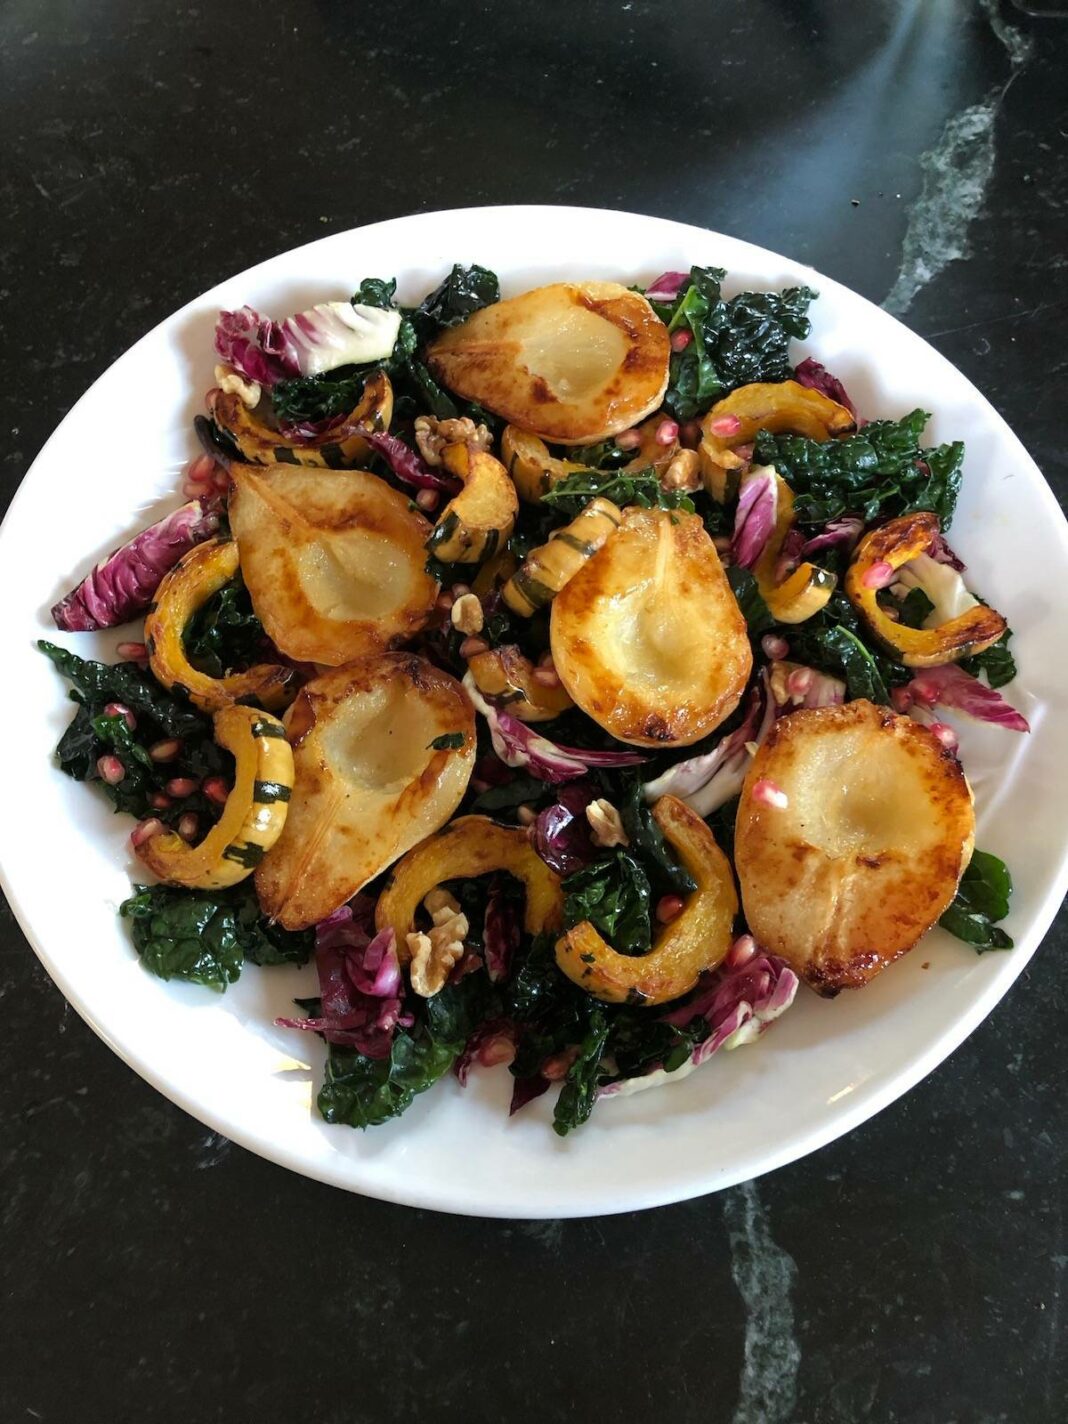 Roasted Pear and Delicata Squash with Fall Greens.